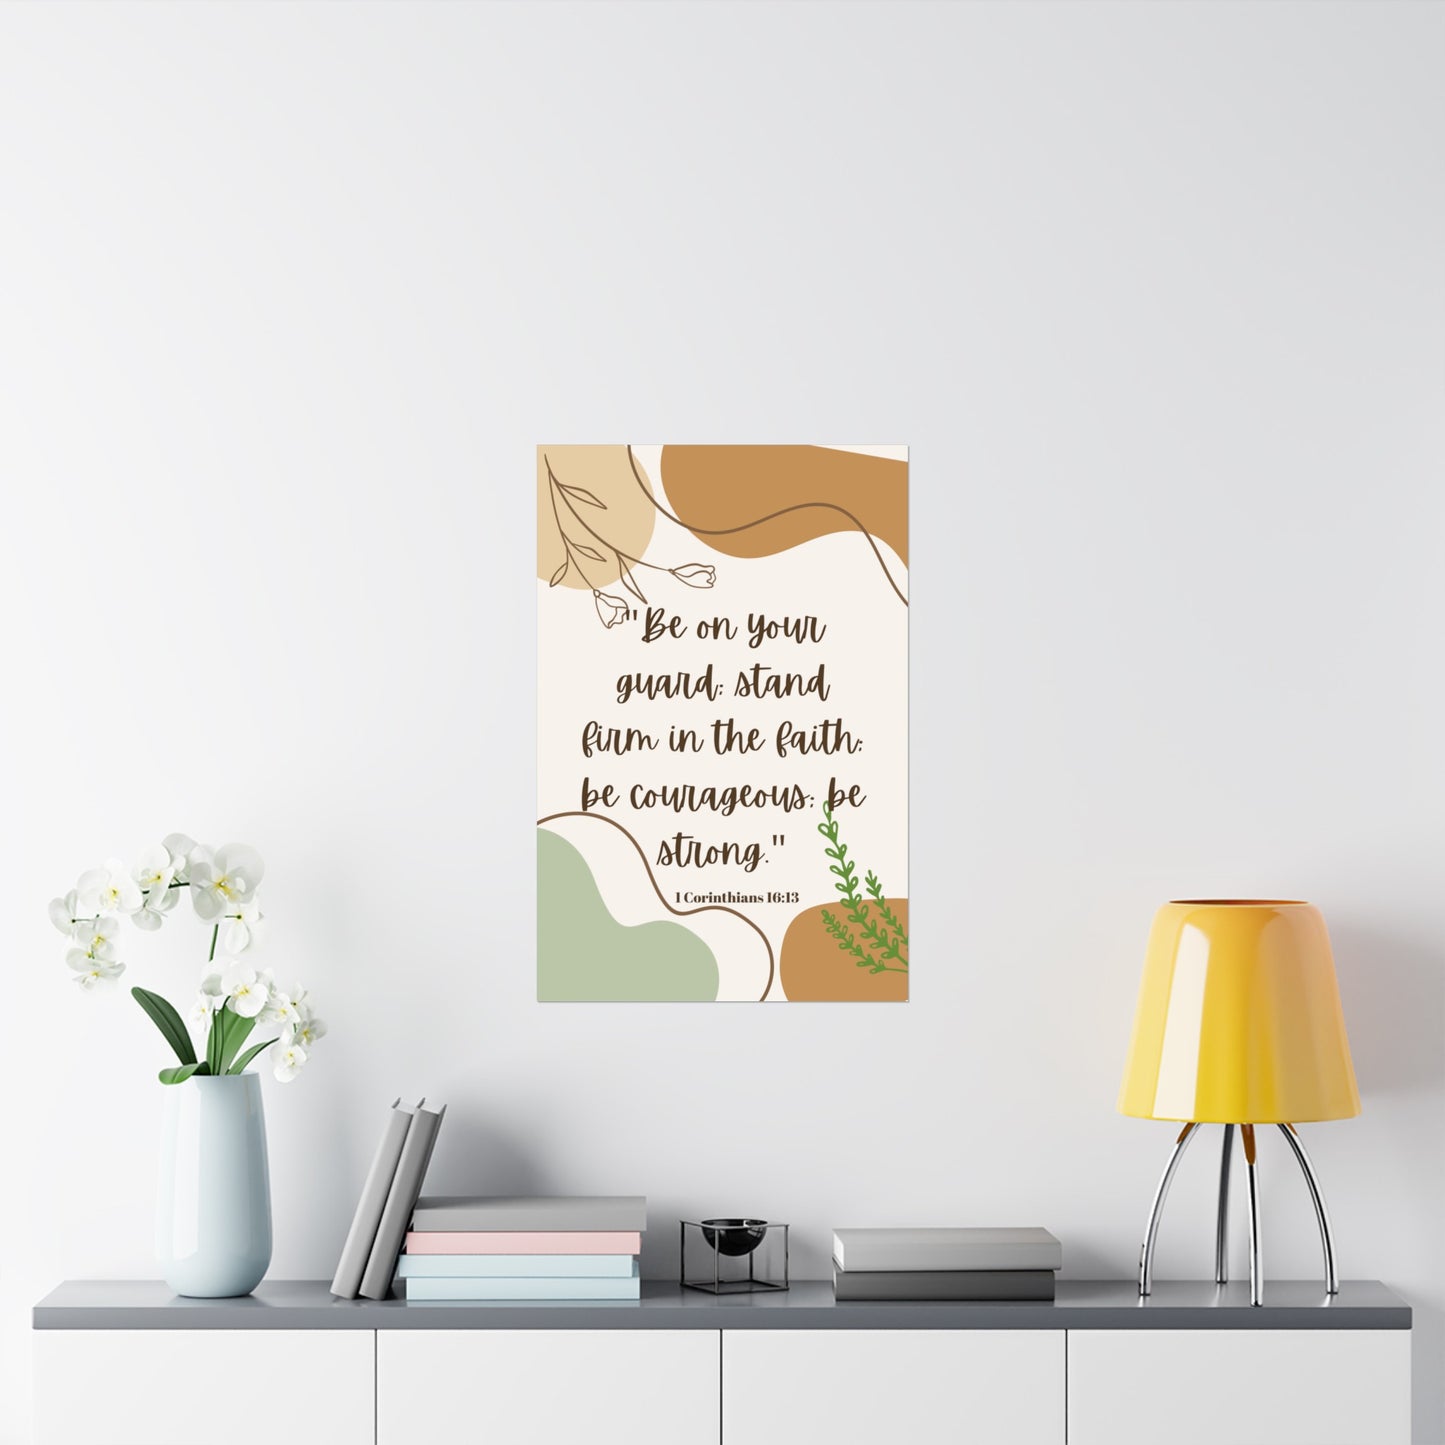 Inspirational Posters for Room - Premium Matte Vertical Art with Bible Verse | Assembled in the USA,Assembled in USA,Back to School,Home & Living,Indoor,Made in the USA,Made in USA,Matte,Paper,Posters,Valentine's Day promotion